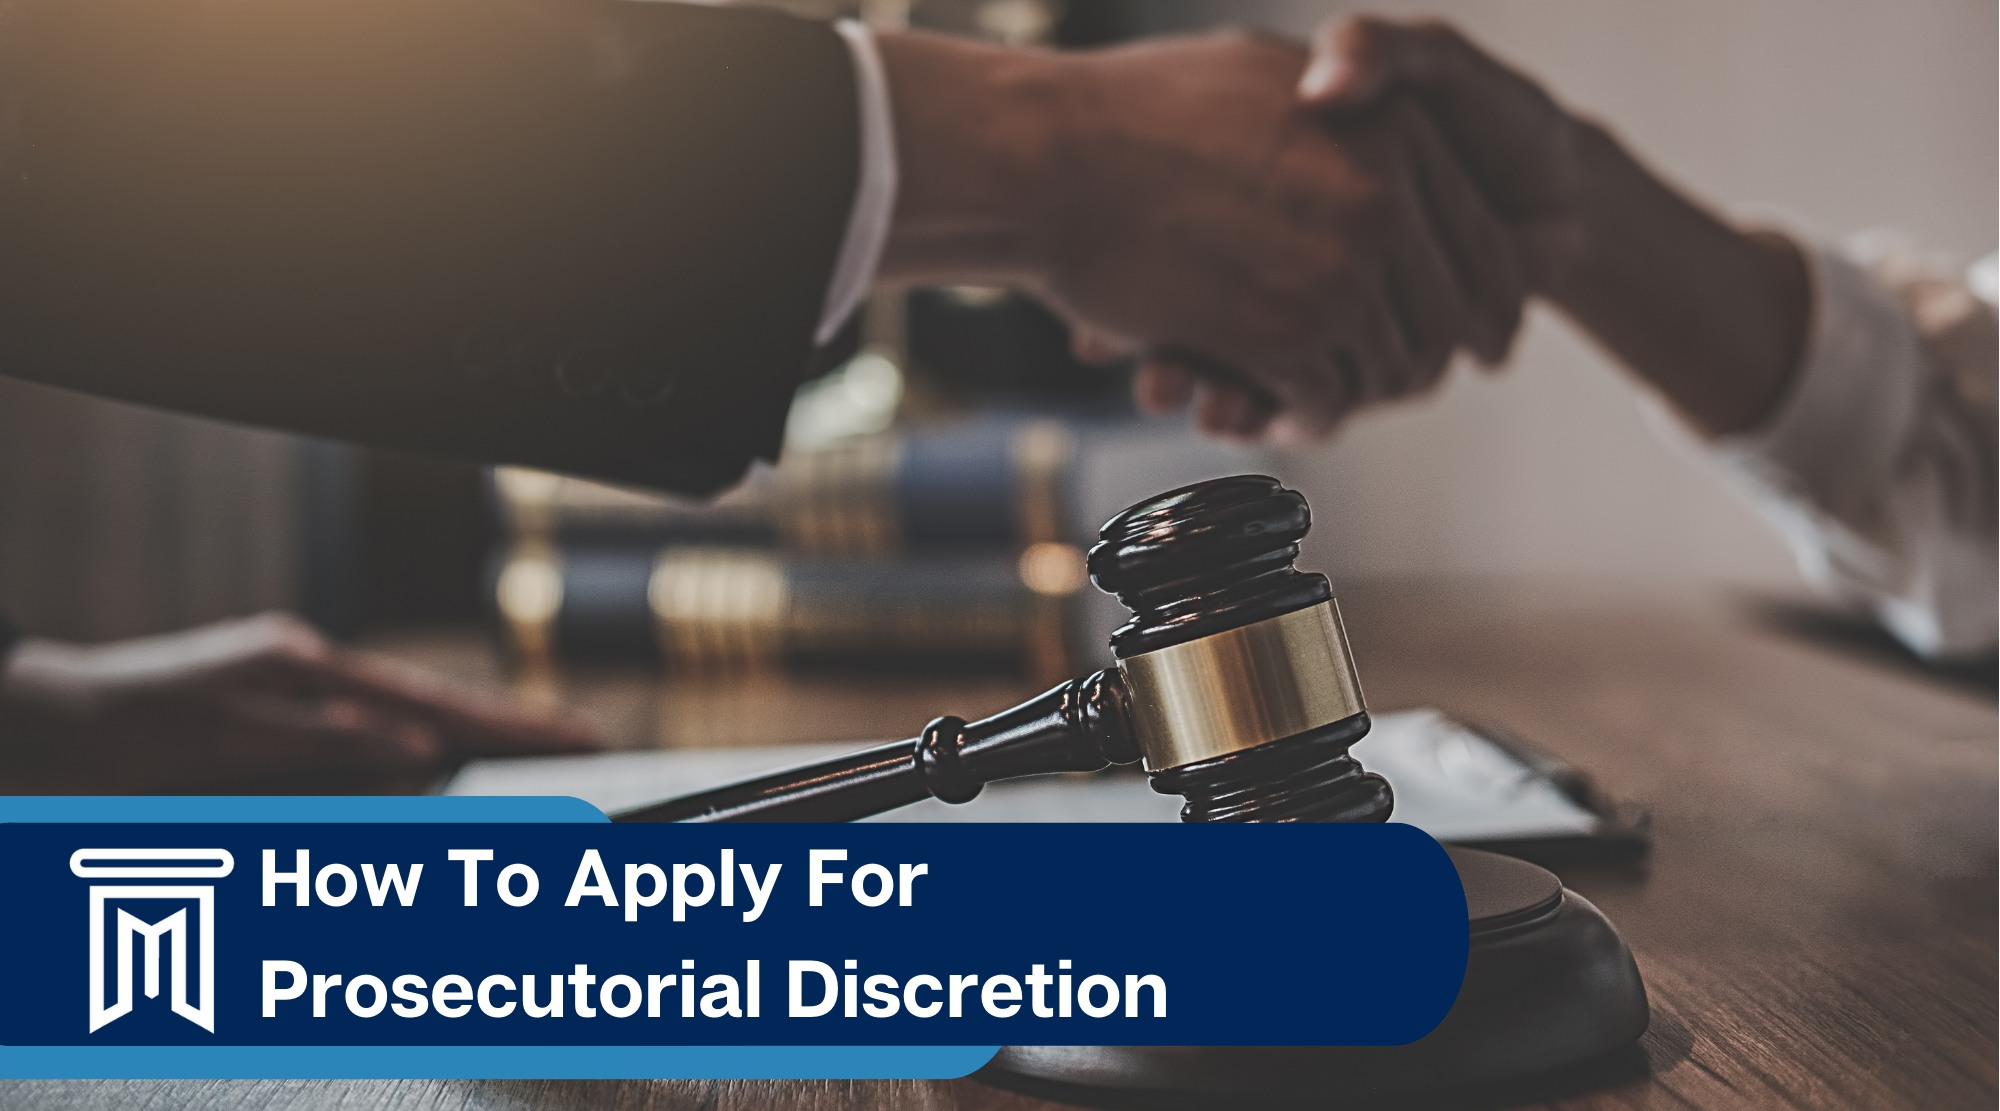 How to apply for prosecutorial discretion